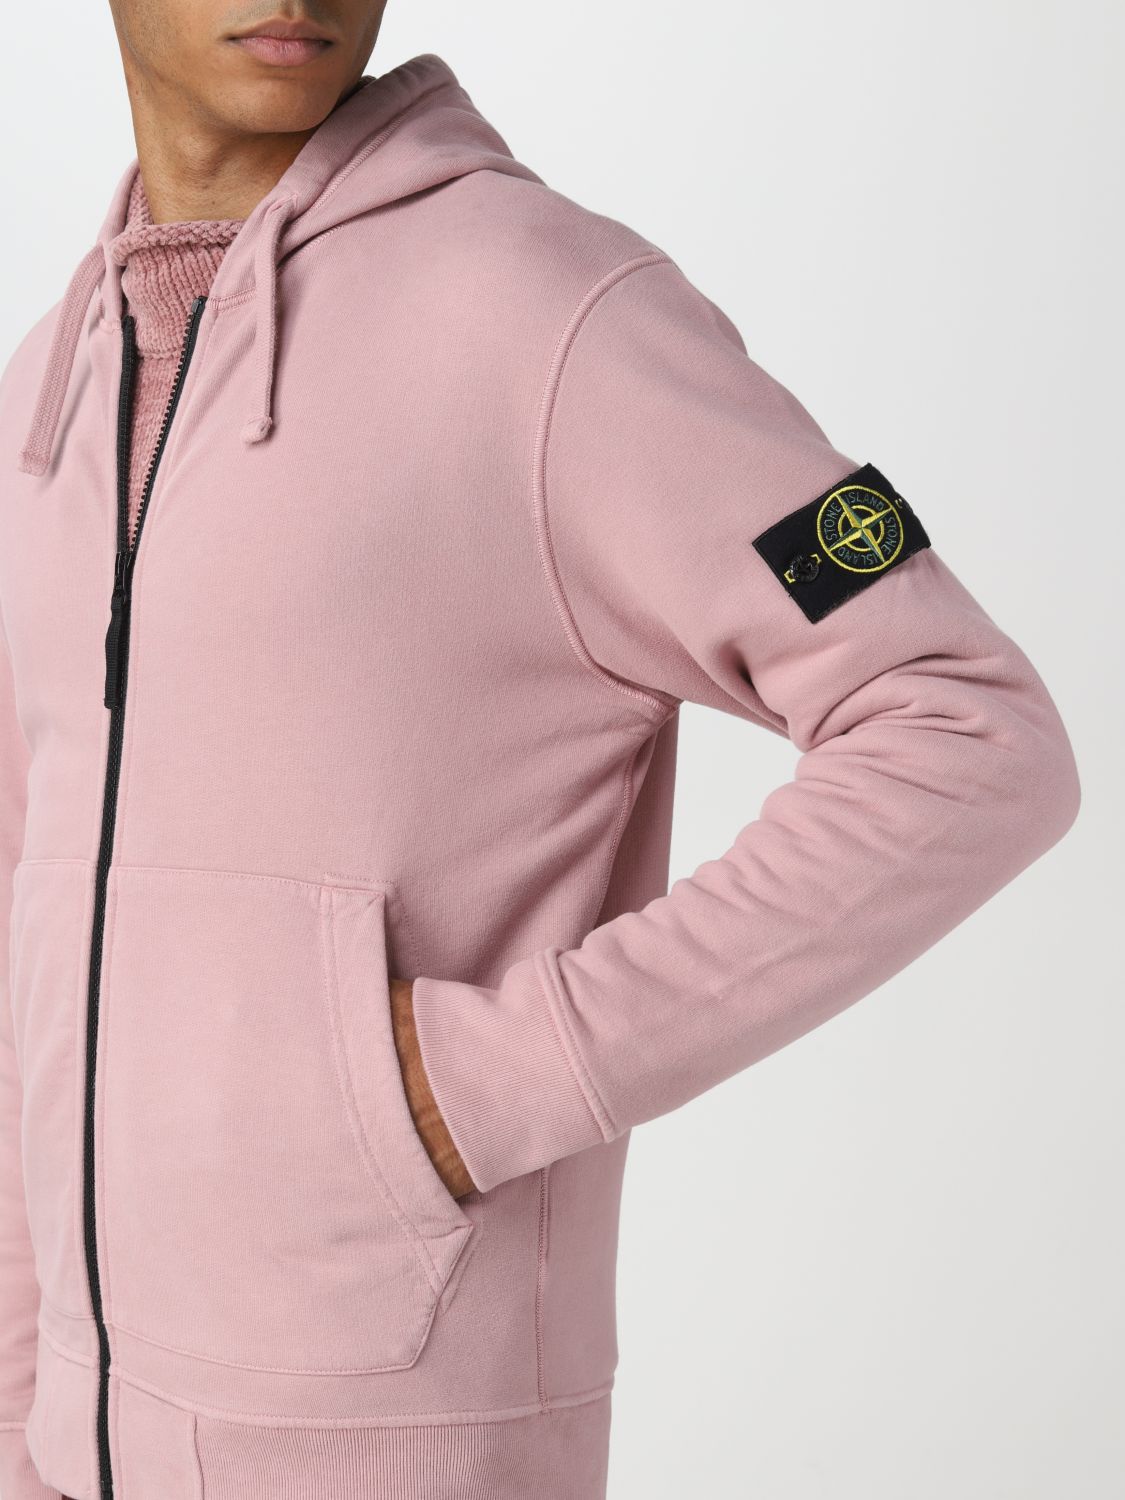 Sweatshirt Stone Island: Stone Island sweatshirt for man pink 4